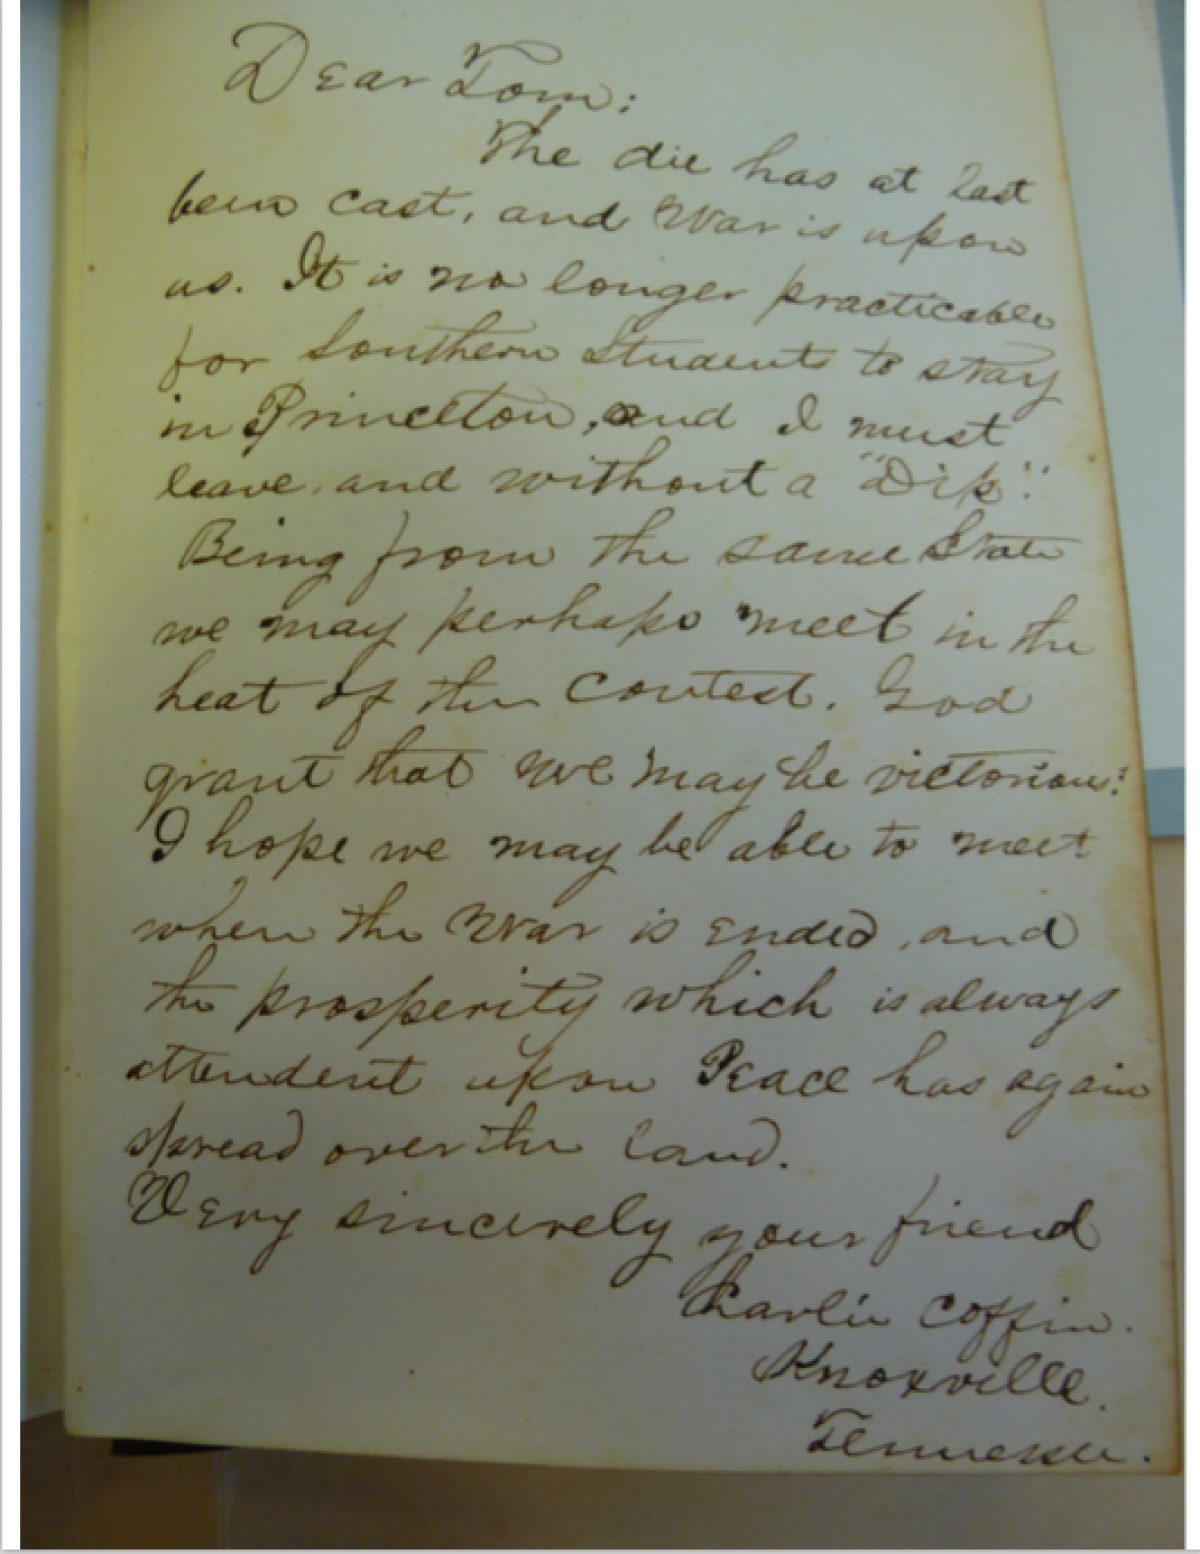 Autograph Book Entry by Charles Coffin